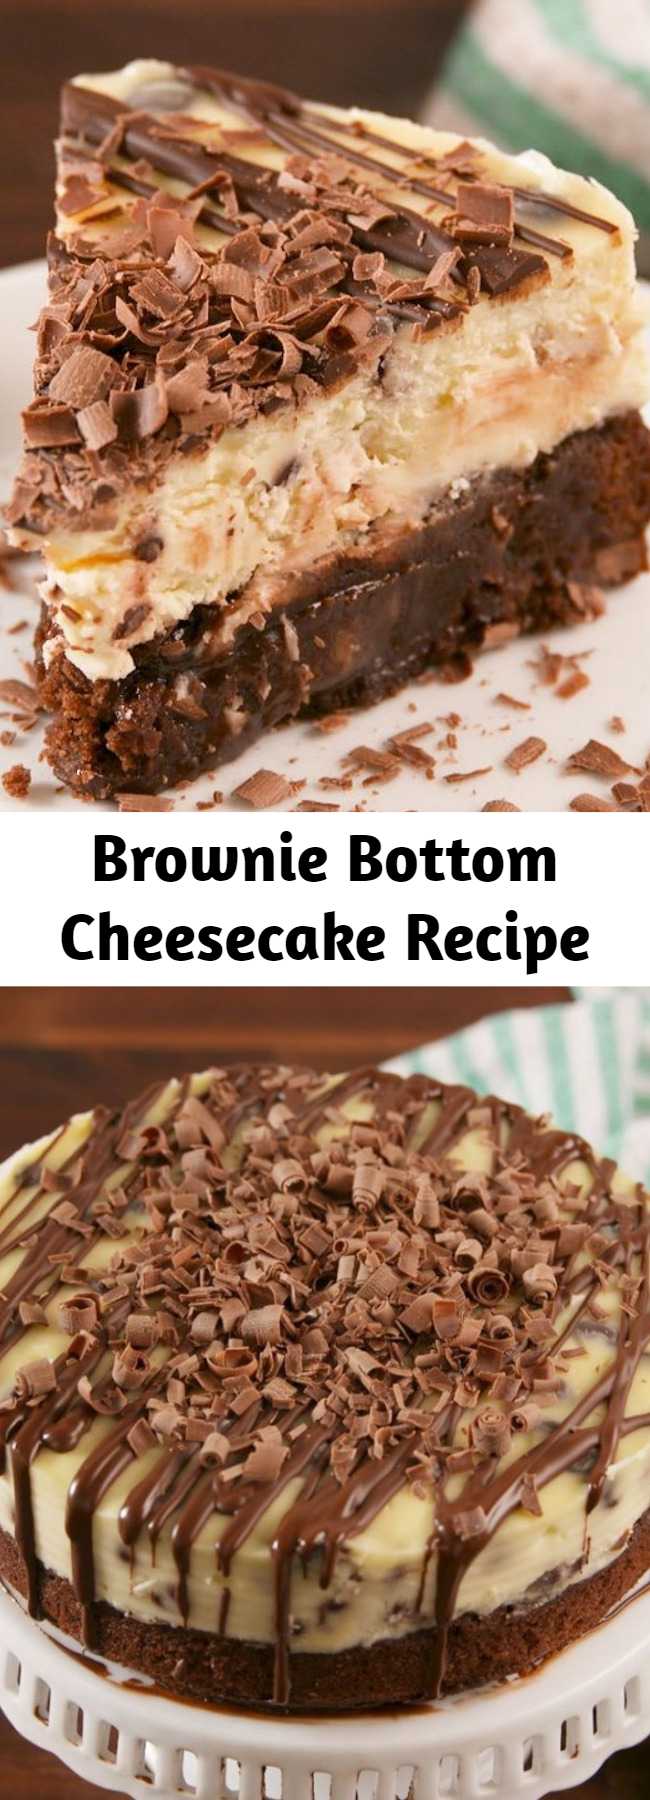 Brownie Bottom Cheesecake Recipe - We didn't realize cheesecake could get even better. #food #easyrecipe #dessert #ideas #cake